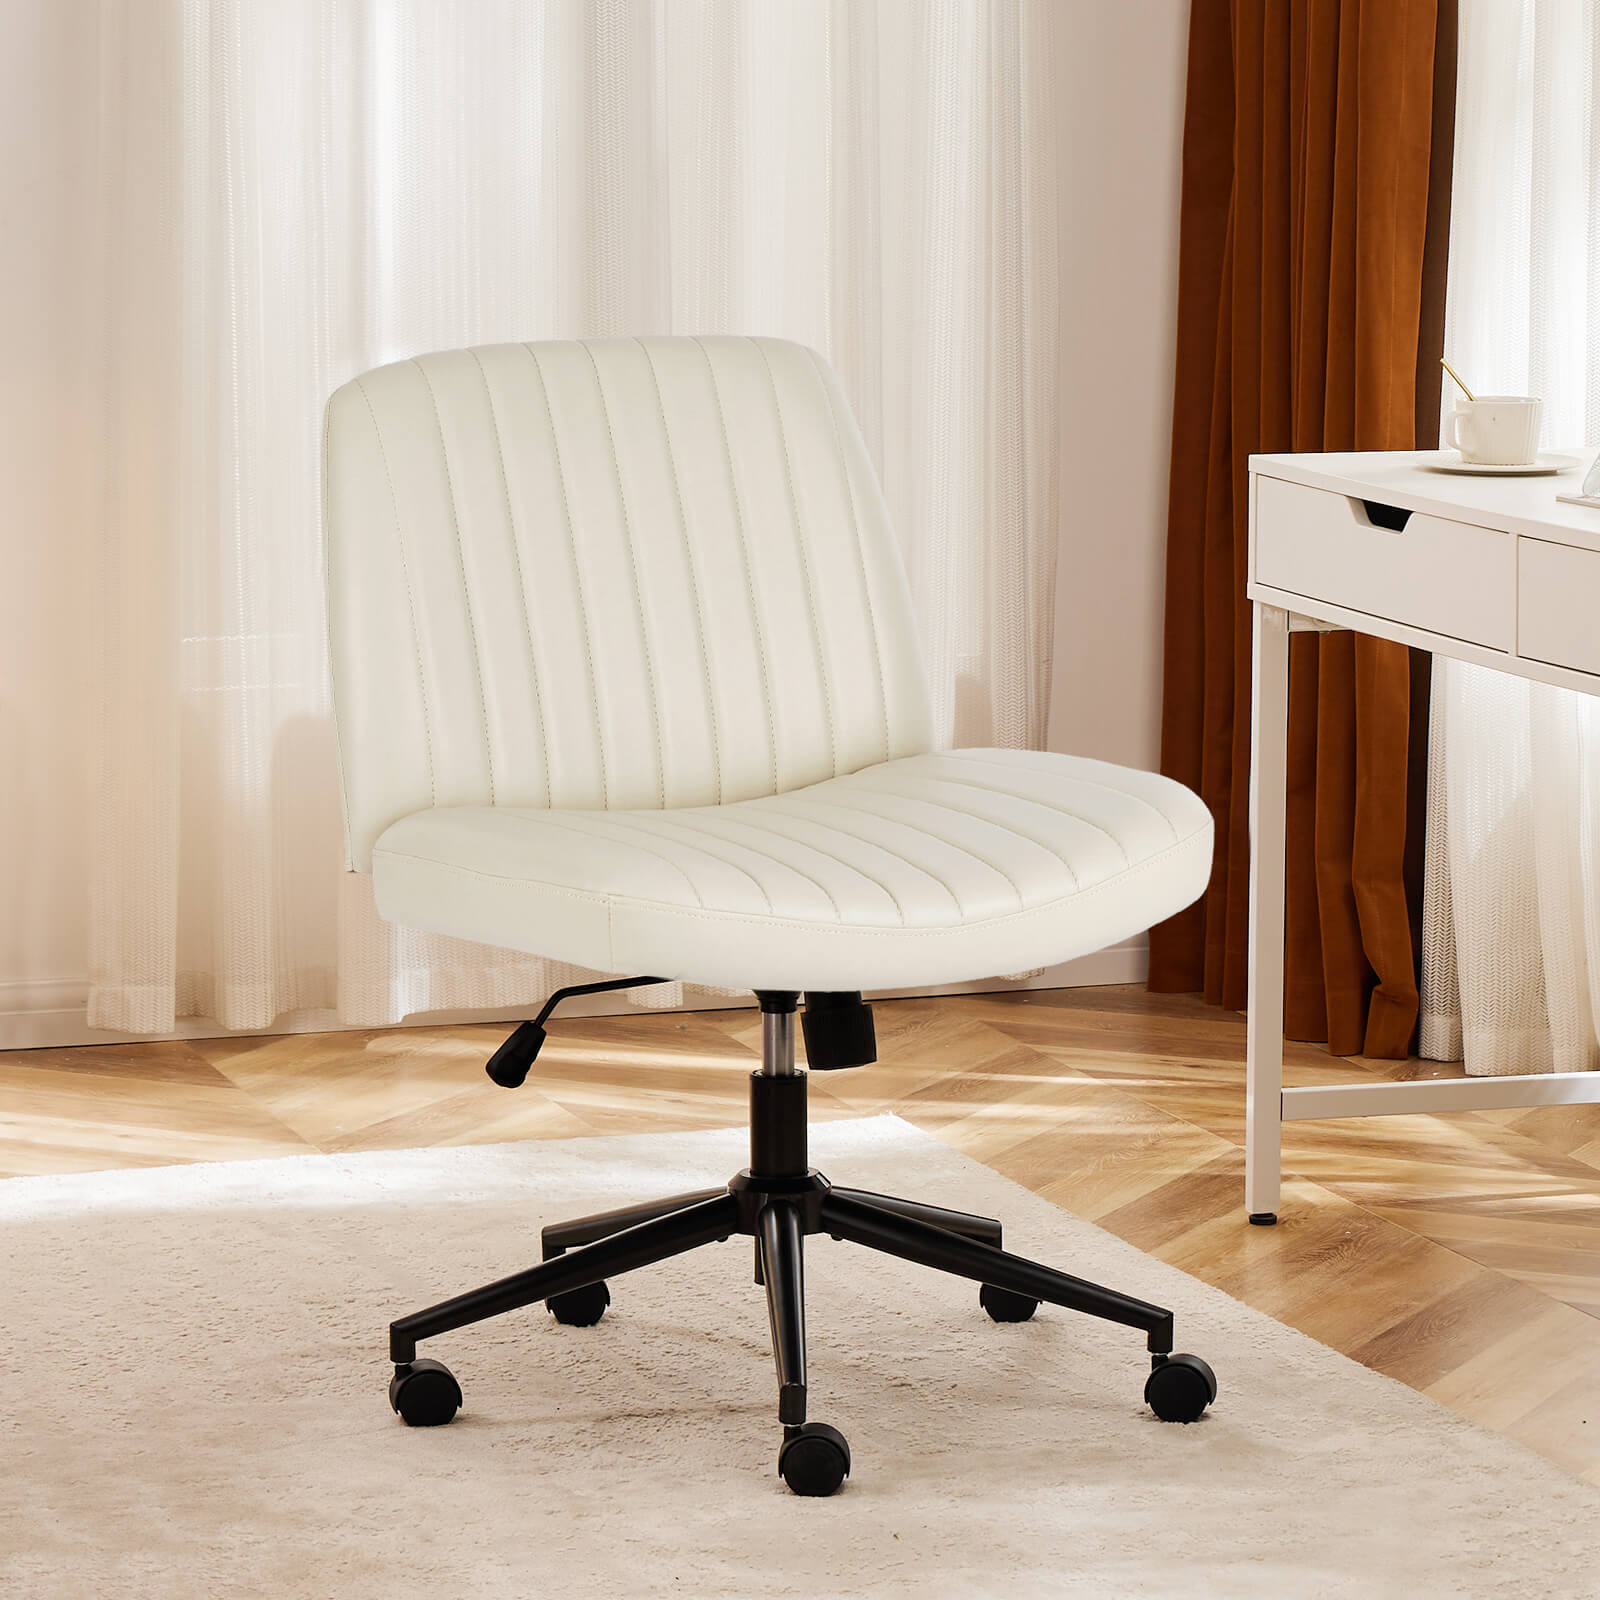 Cross-legged chair without armrests, with wheels, swivelling, height-adjustable vanity chair, office chair, can be used with fabric dresser